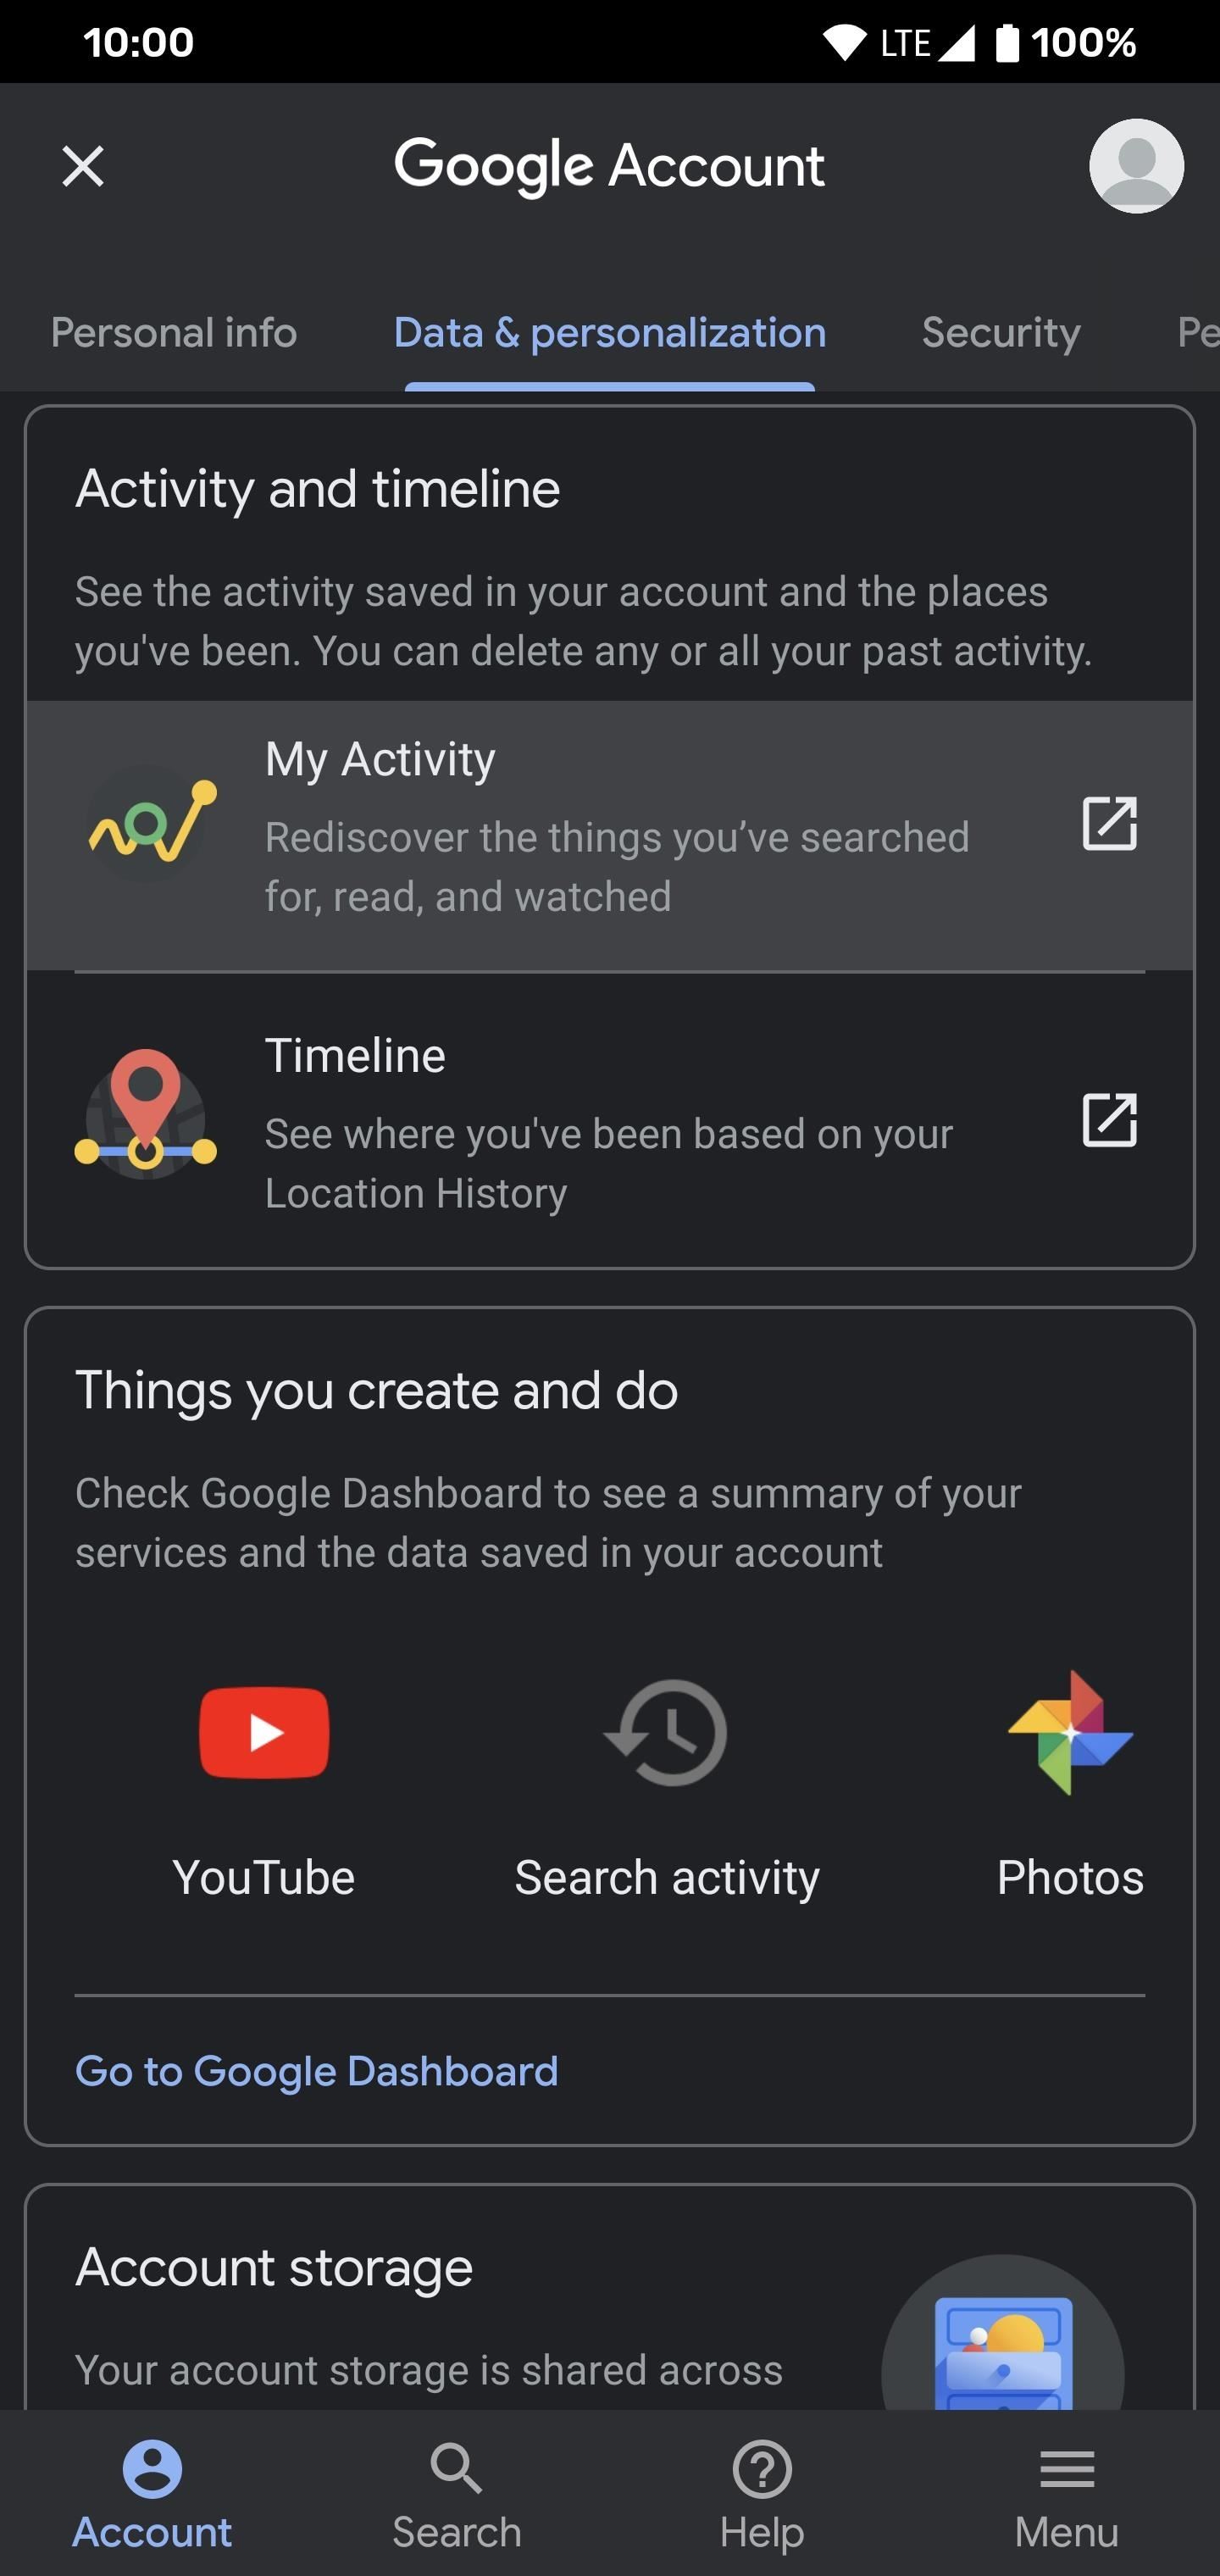 How to View Your Stadia Gaming Sessions from Your Google Account History